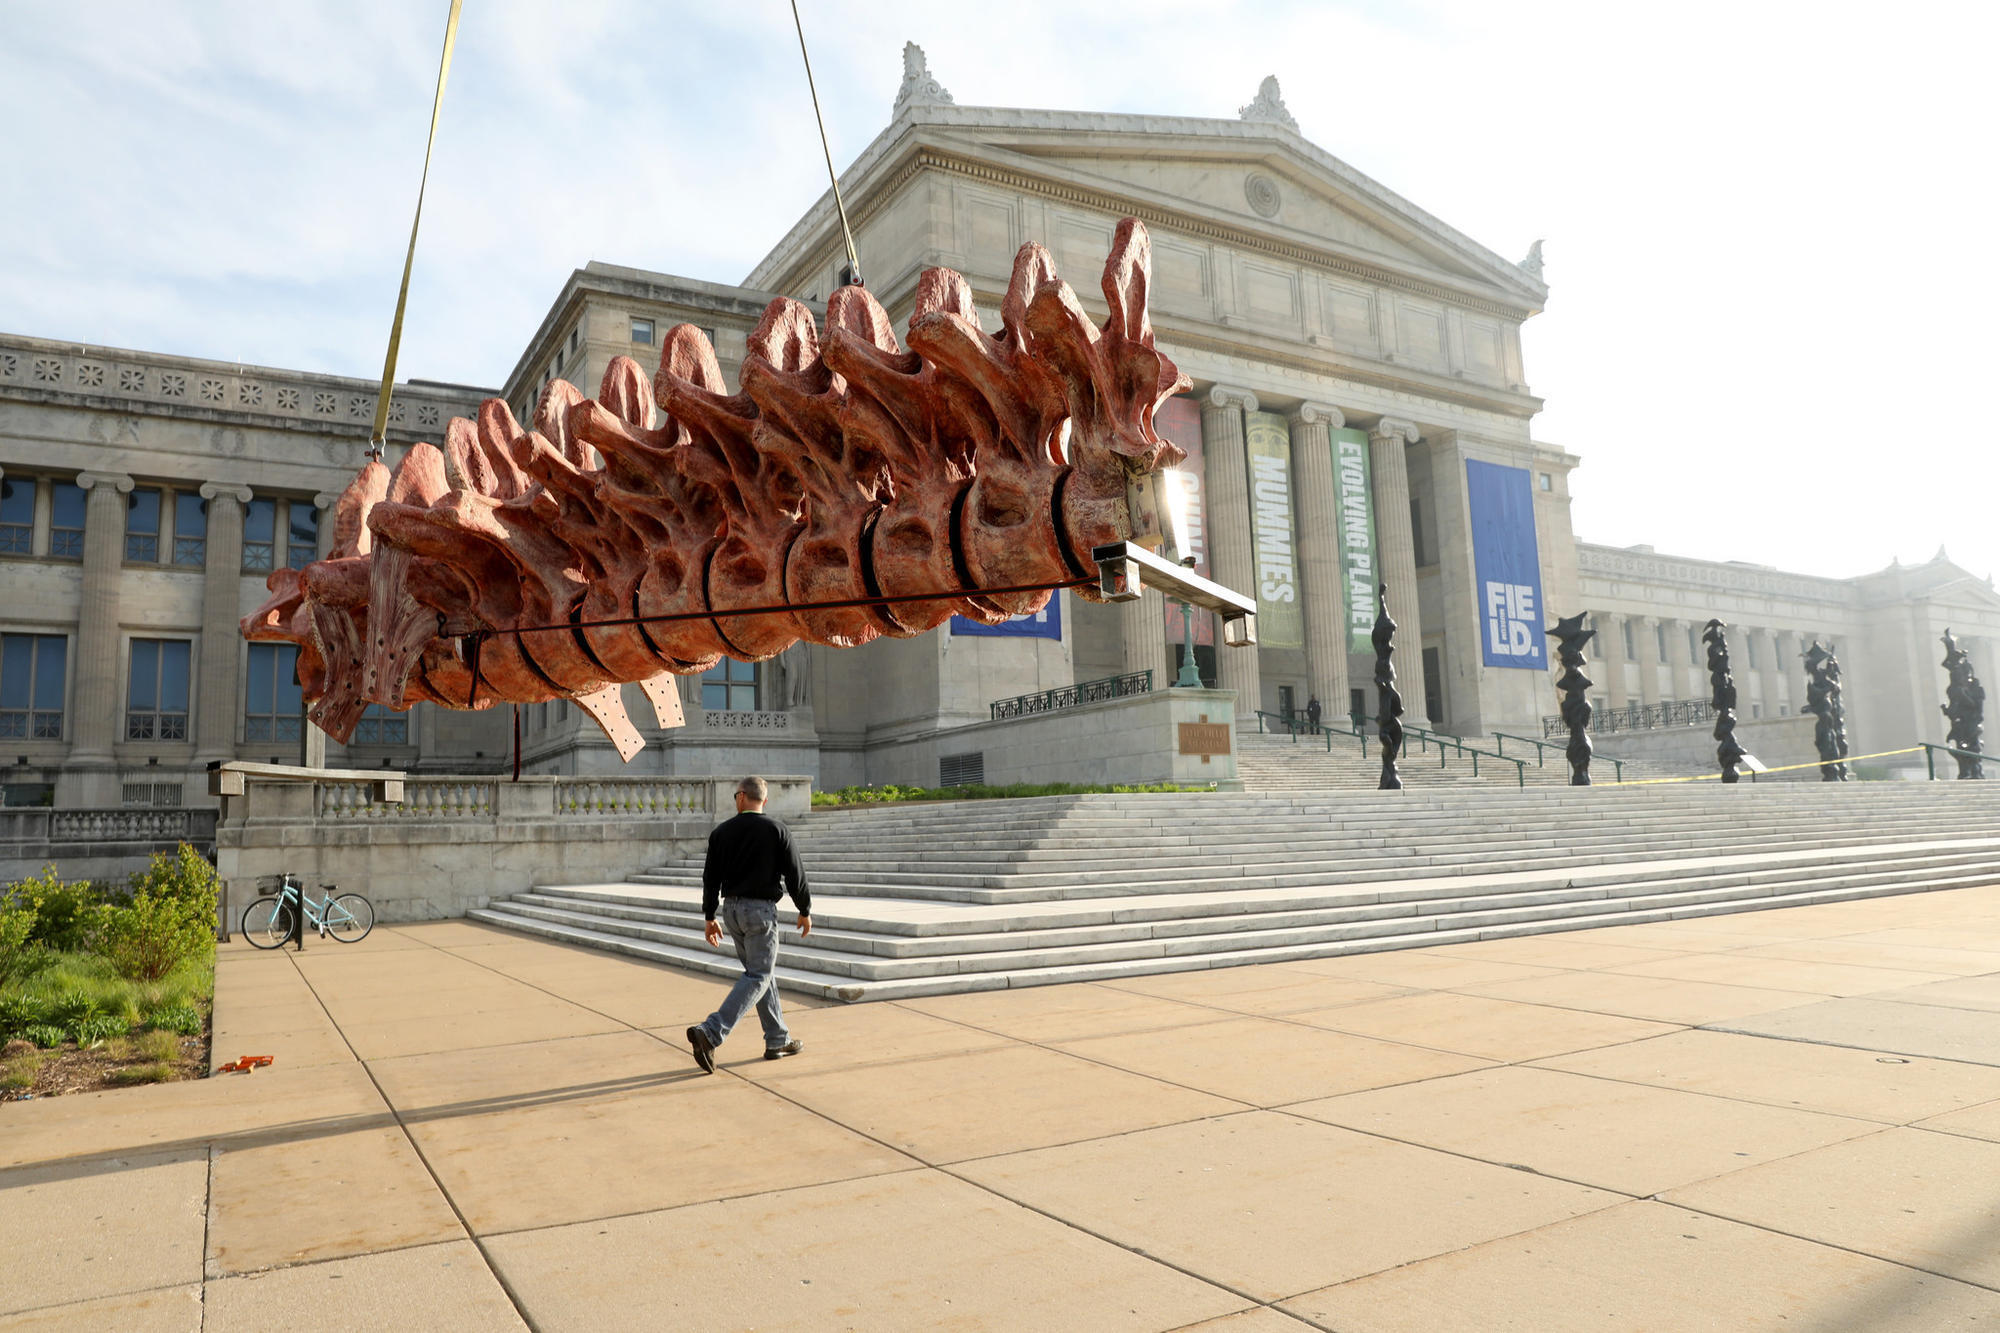 Largest dinosaur ever, Sue's replacement, starts to stand tall in ...